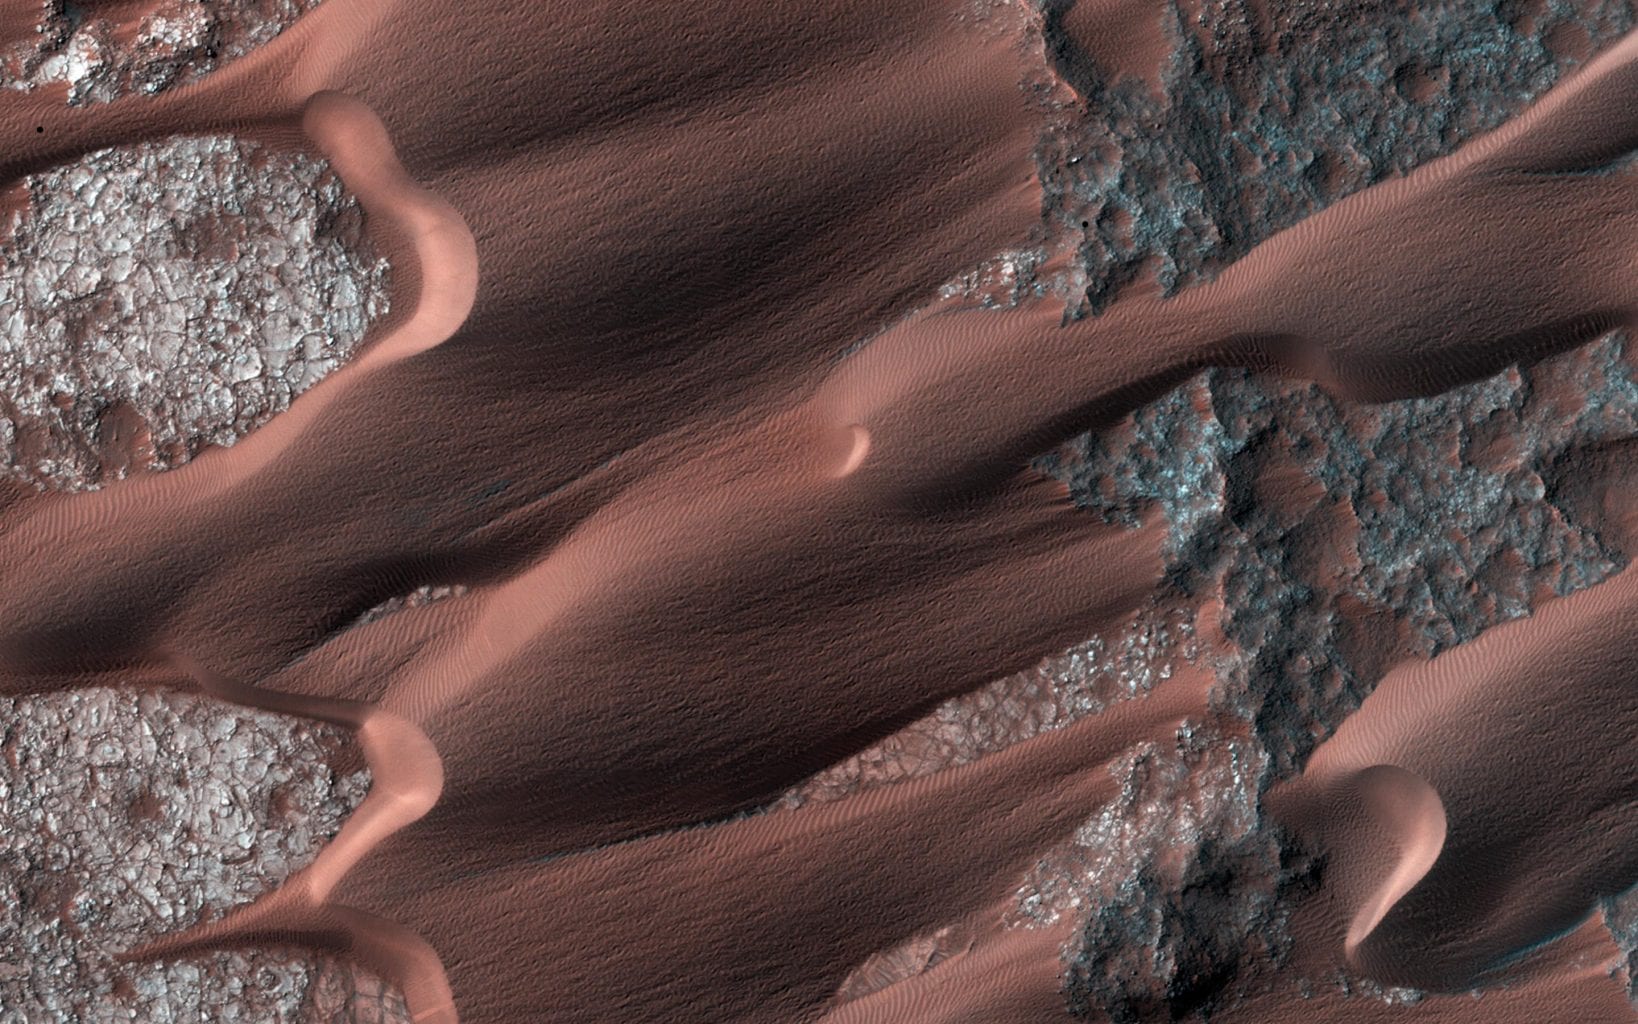 The Nili Patera dune field, photographed here by the Mars Reconnaissance Orbiter, lies on an ancient bed of solidified lava. Credit: NASA/JPL-Caltech/Univ. of Arizona